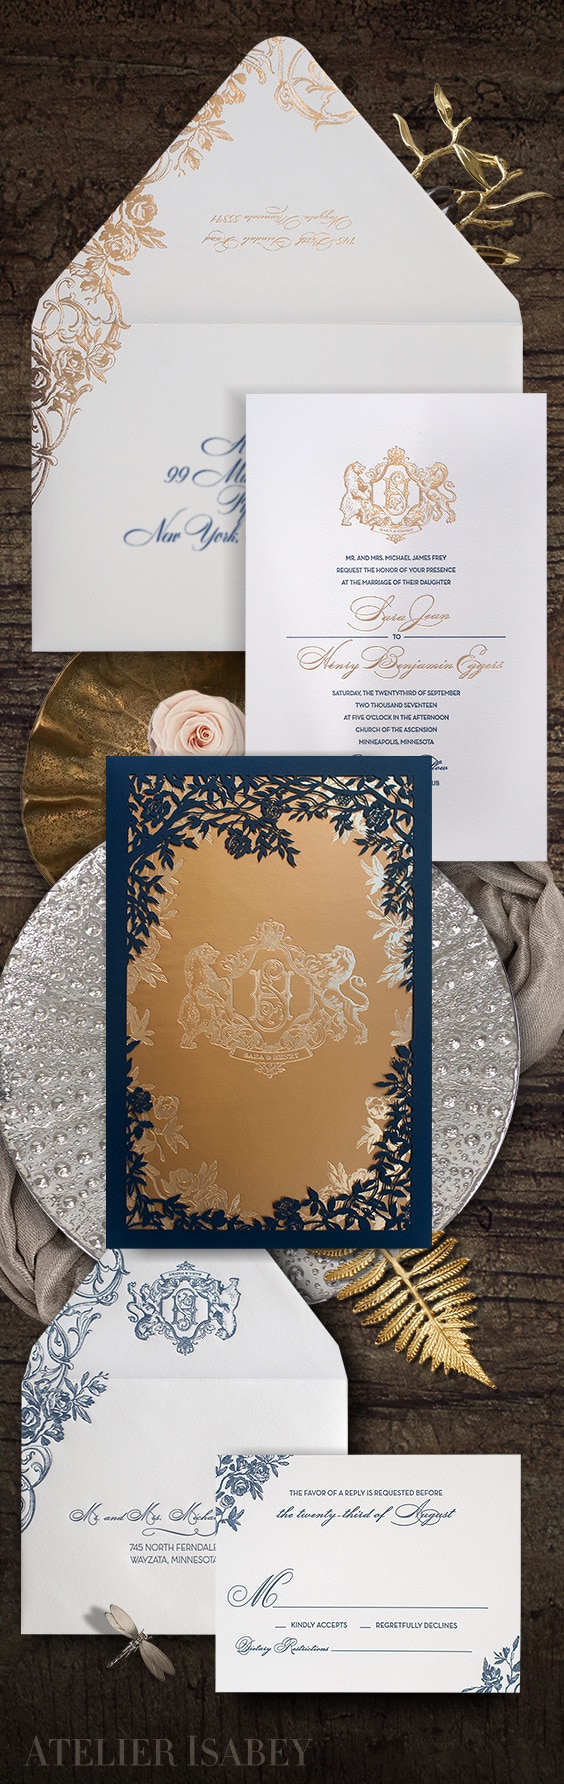 Beauty and the beast laser cut wedding invitation